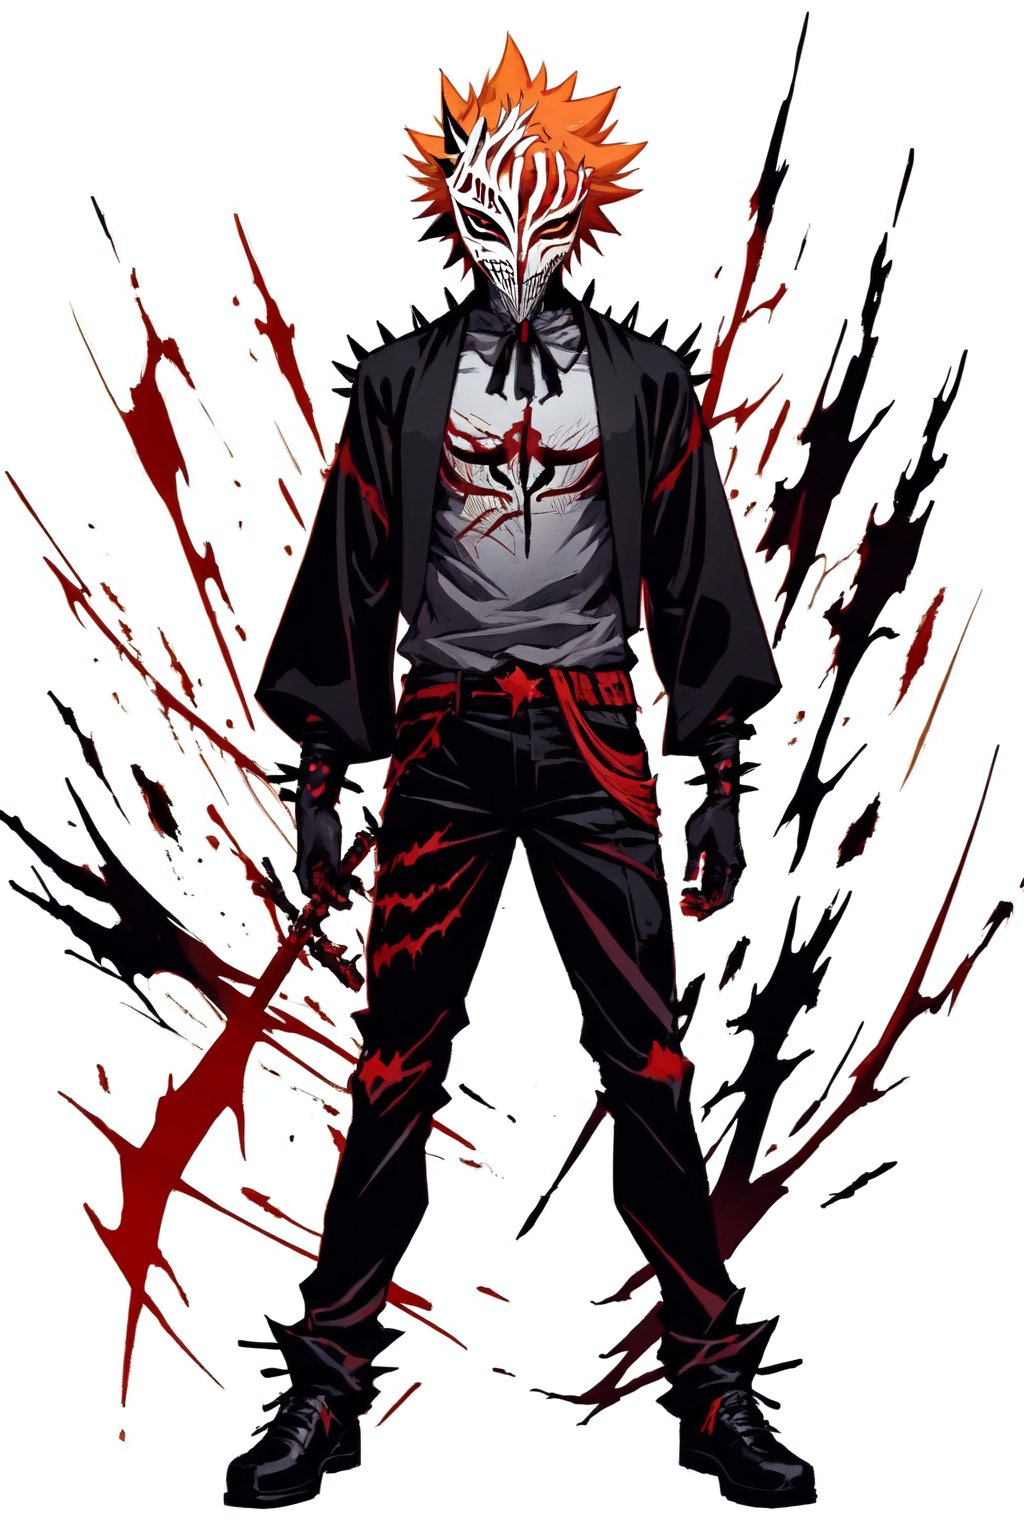 hollow mask ichigo, colored sclera, mask, black sclera, orange hair, looking at viewer, spiked hair, male focus, solo, full body, abstract art, black clothes, shinigami clothes

